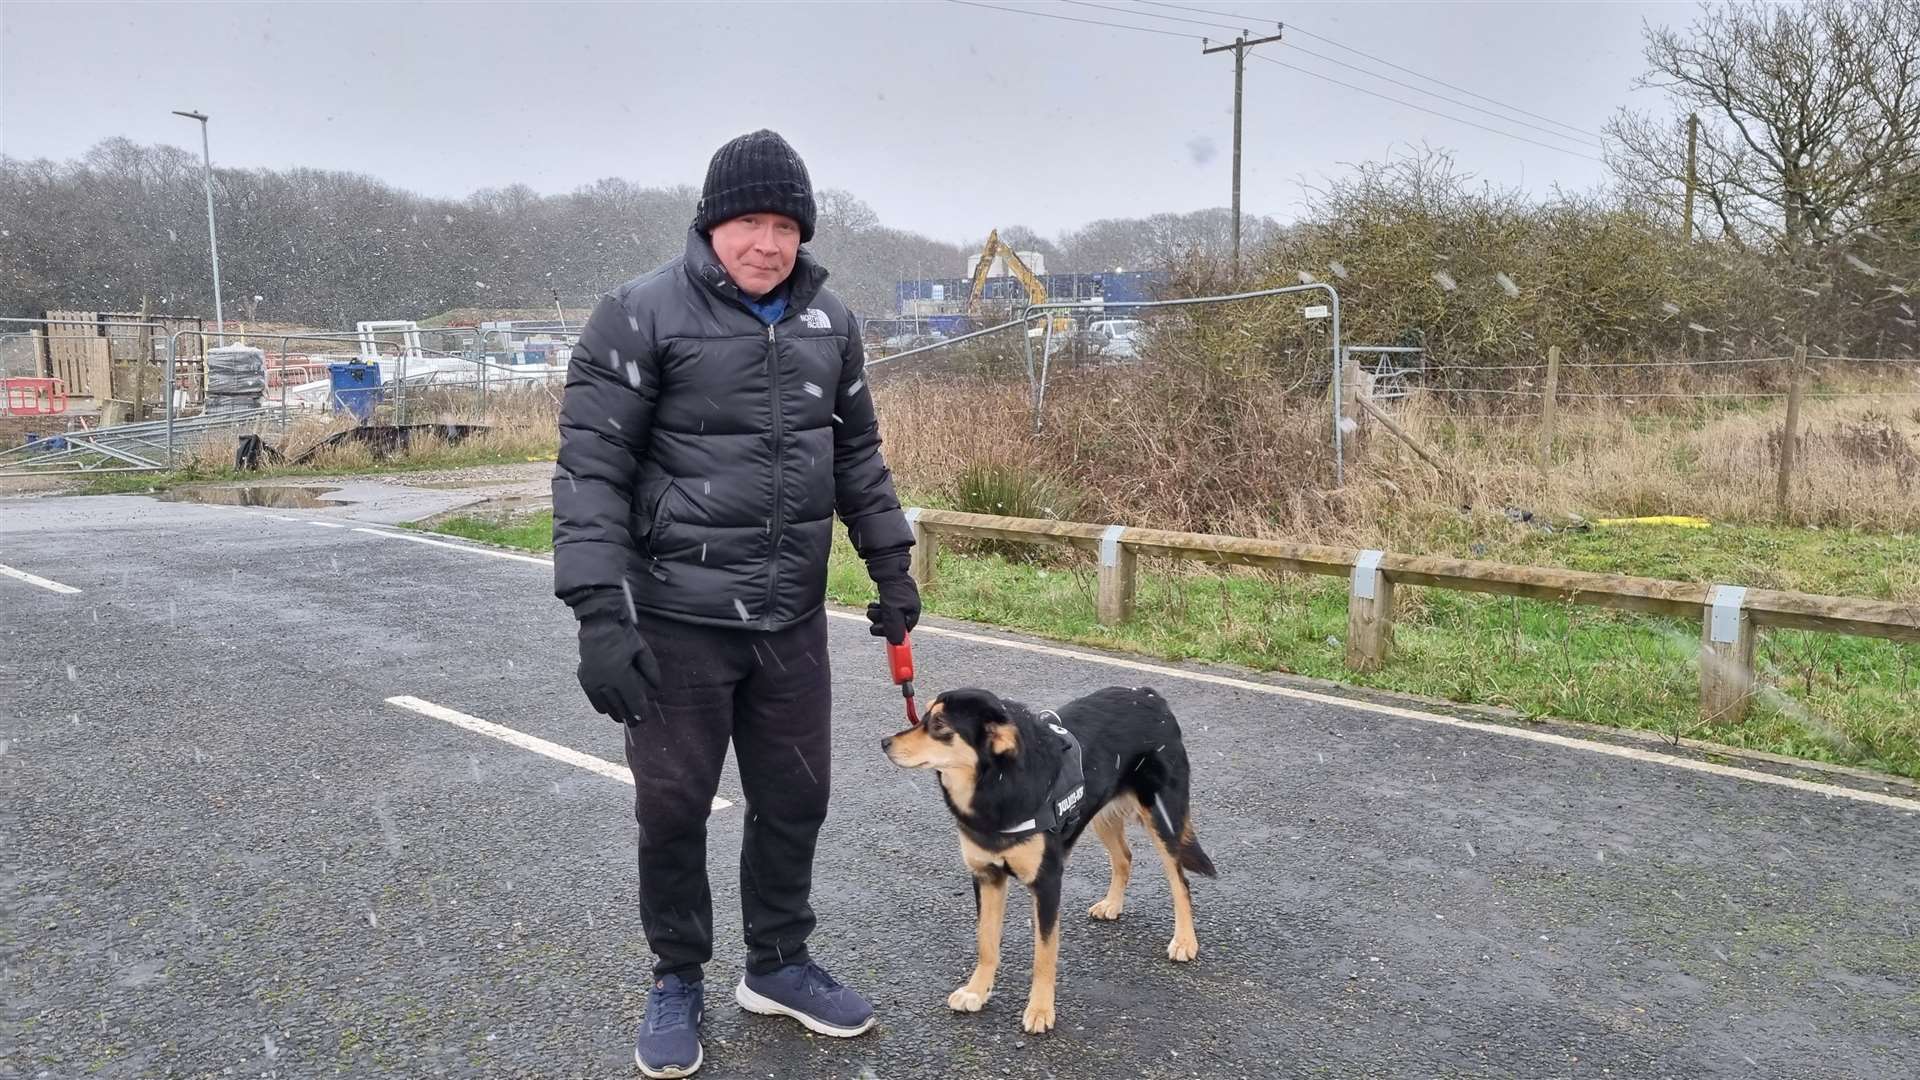 Mark Twomey from Bridgefield supports opening Rutledge Avenue, which connects Bridgefield and Finberry, to traffic. Mark pictured with dog Raya